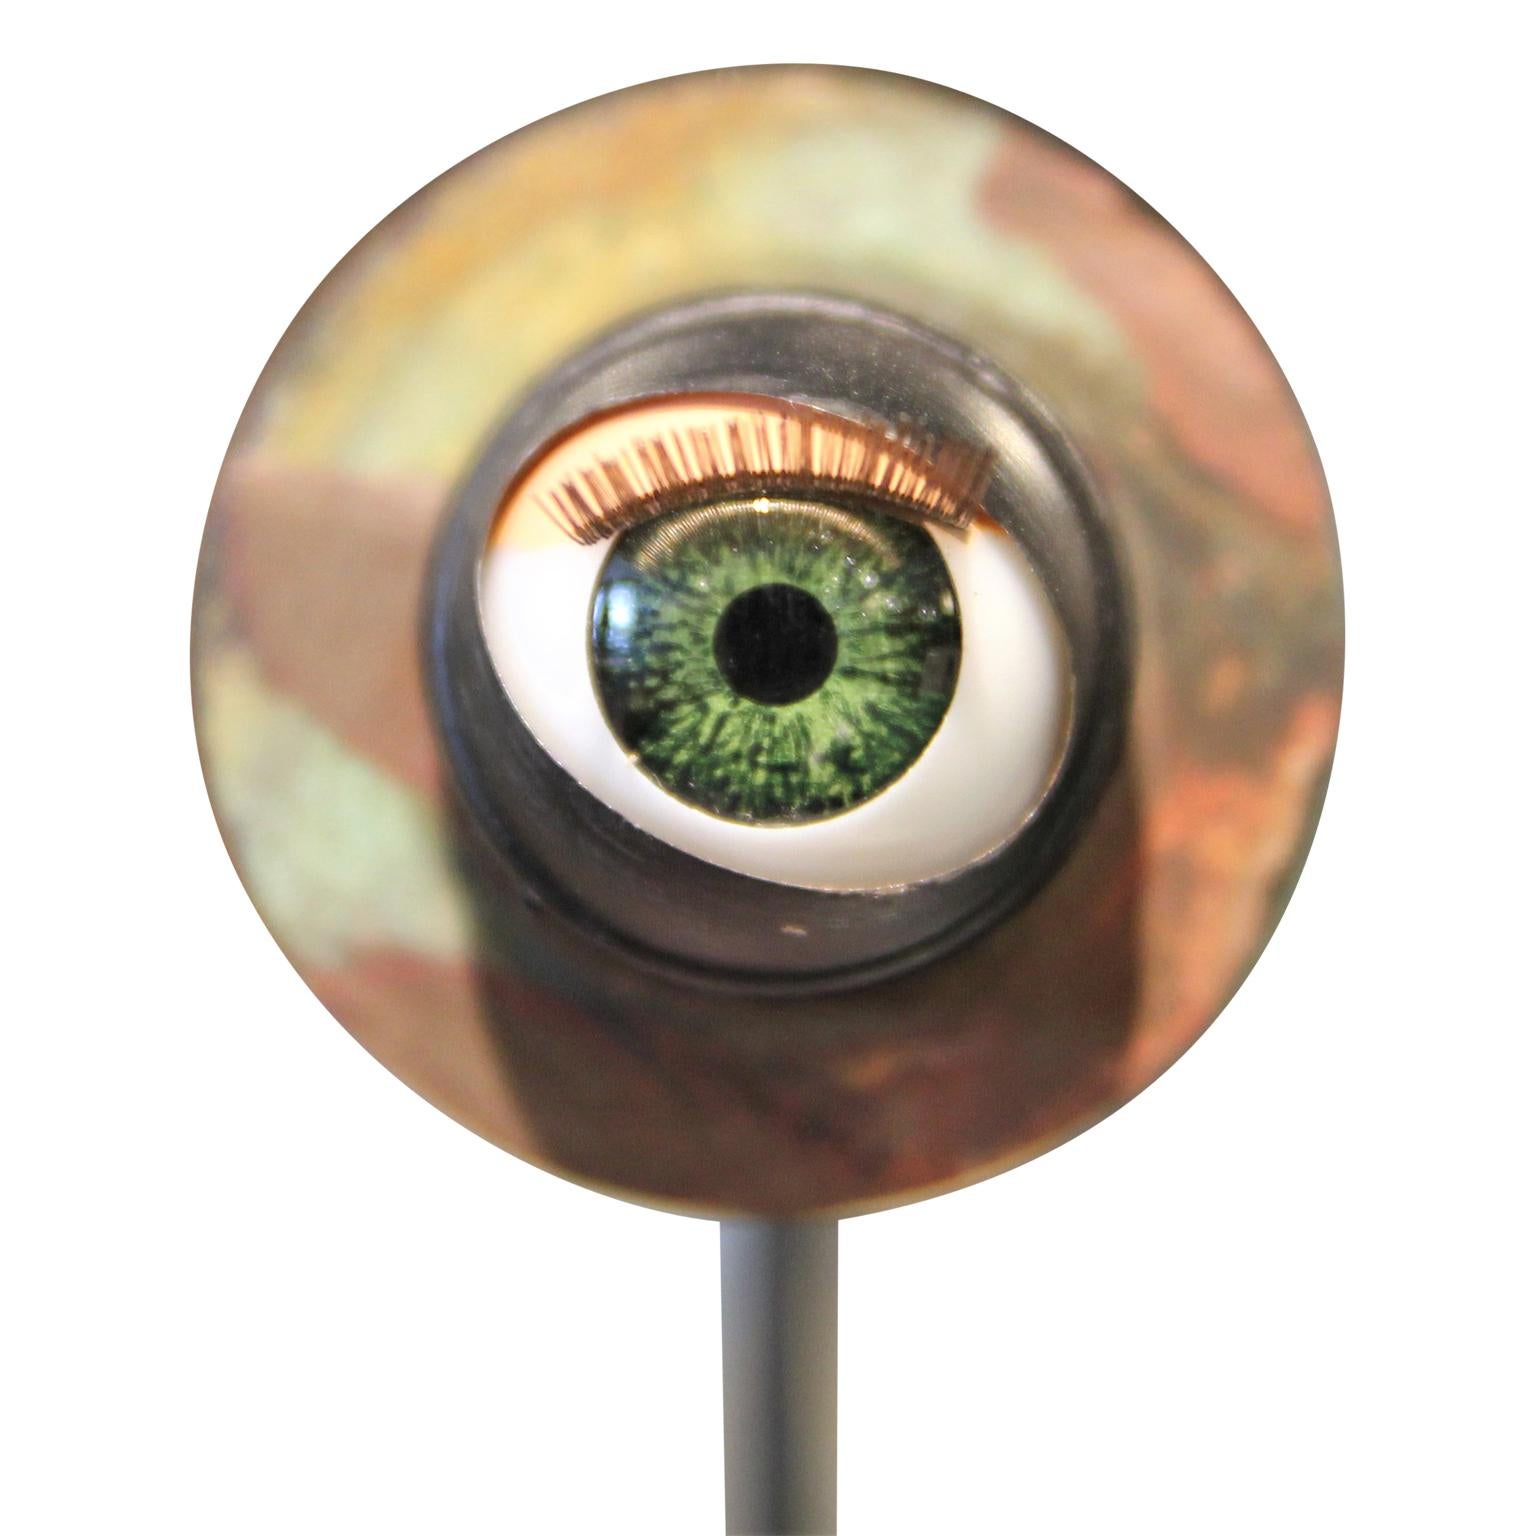 Abstract Surrealist Eyeball Metal Mixed Media Contemporary Sculpture - Brown Abstract Sculpture by Victor Rojas